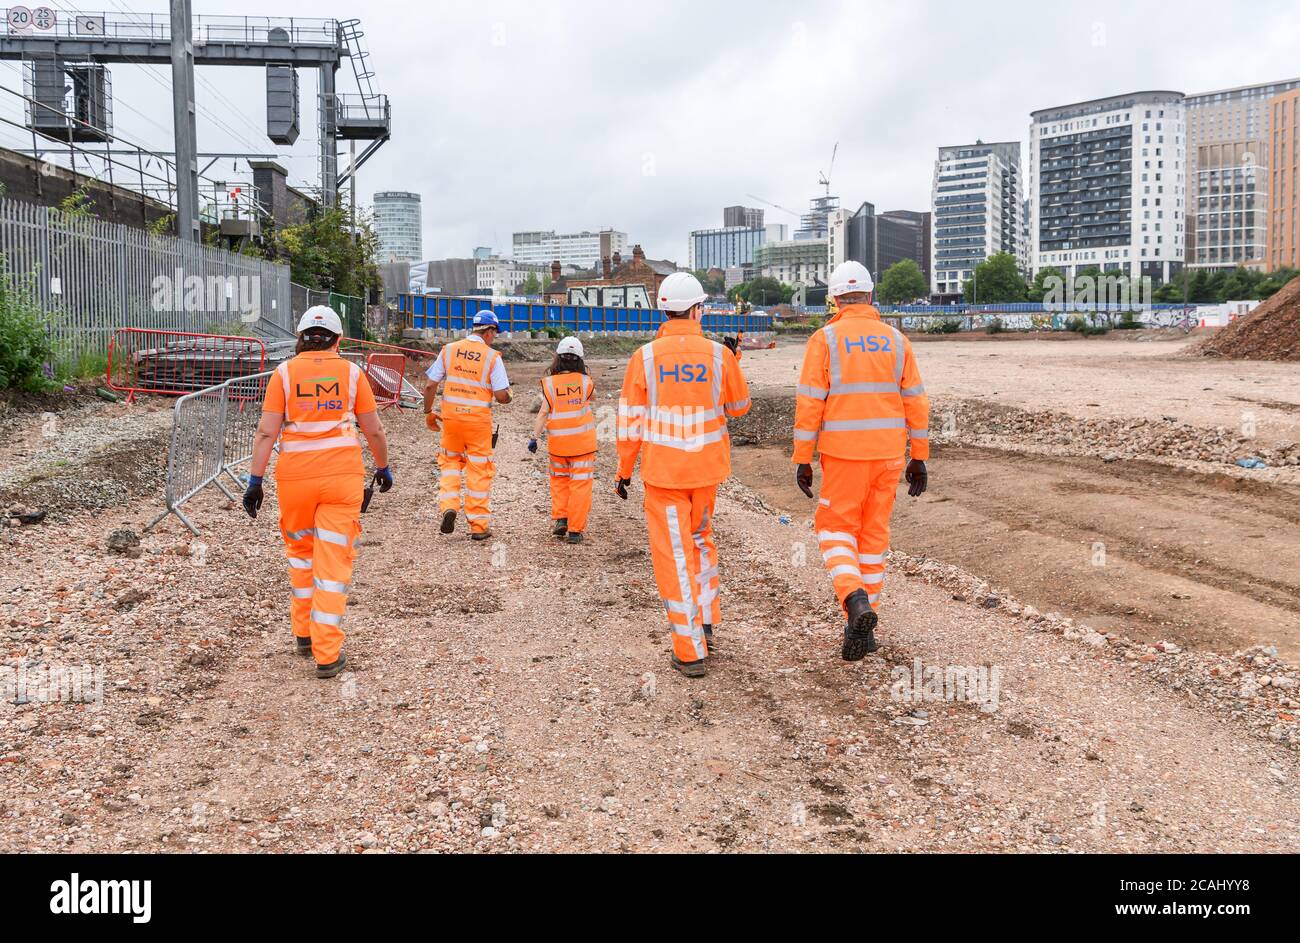 Workers on the site of the new HS2 railway station at Curzon Street in Birmingham, West Midlands, England, UK Stock Photo